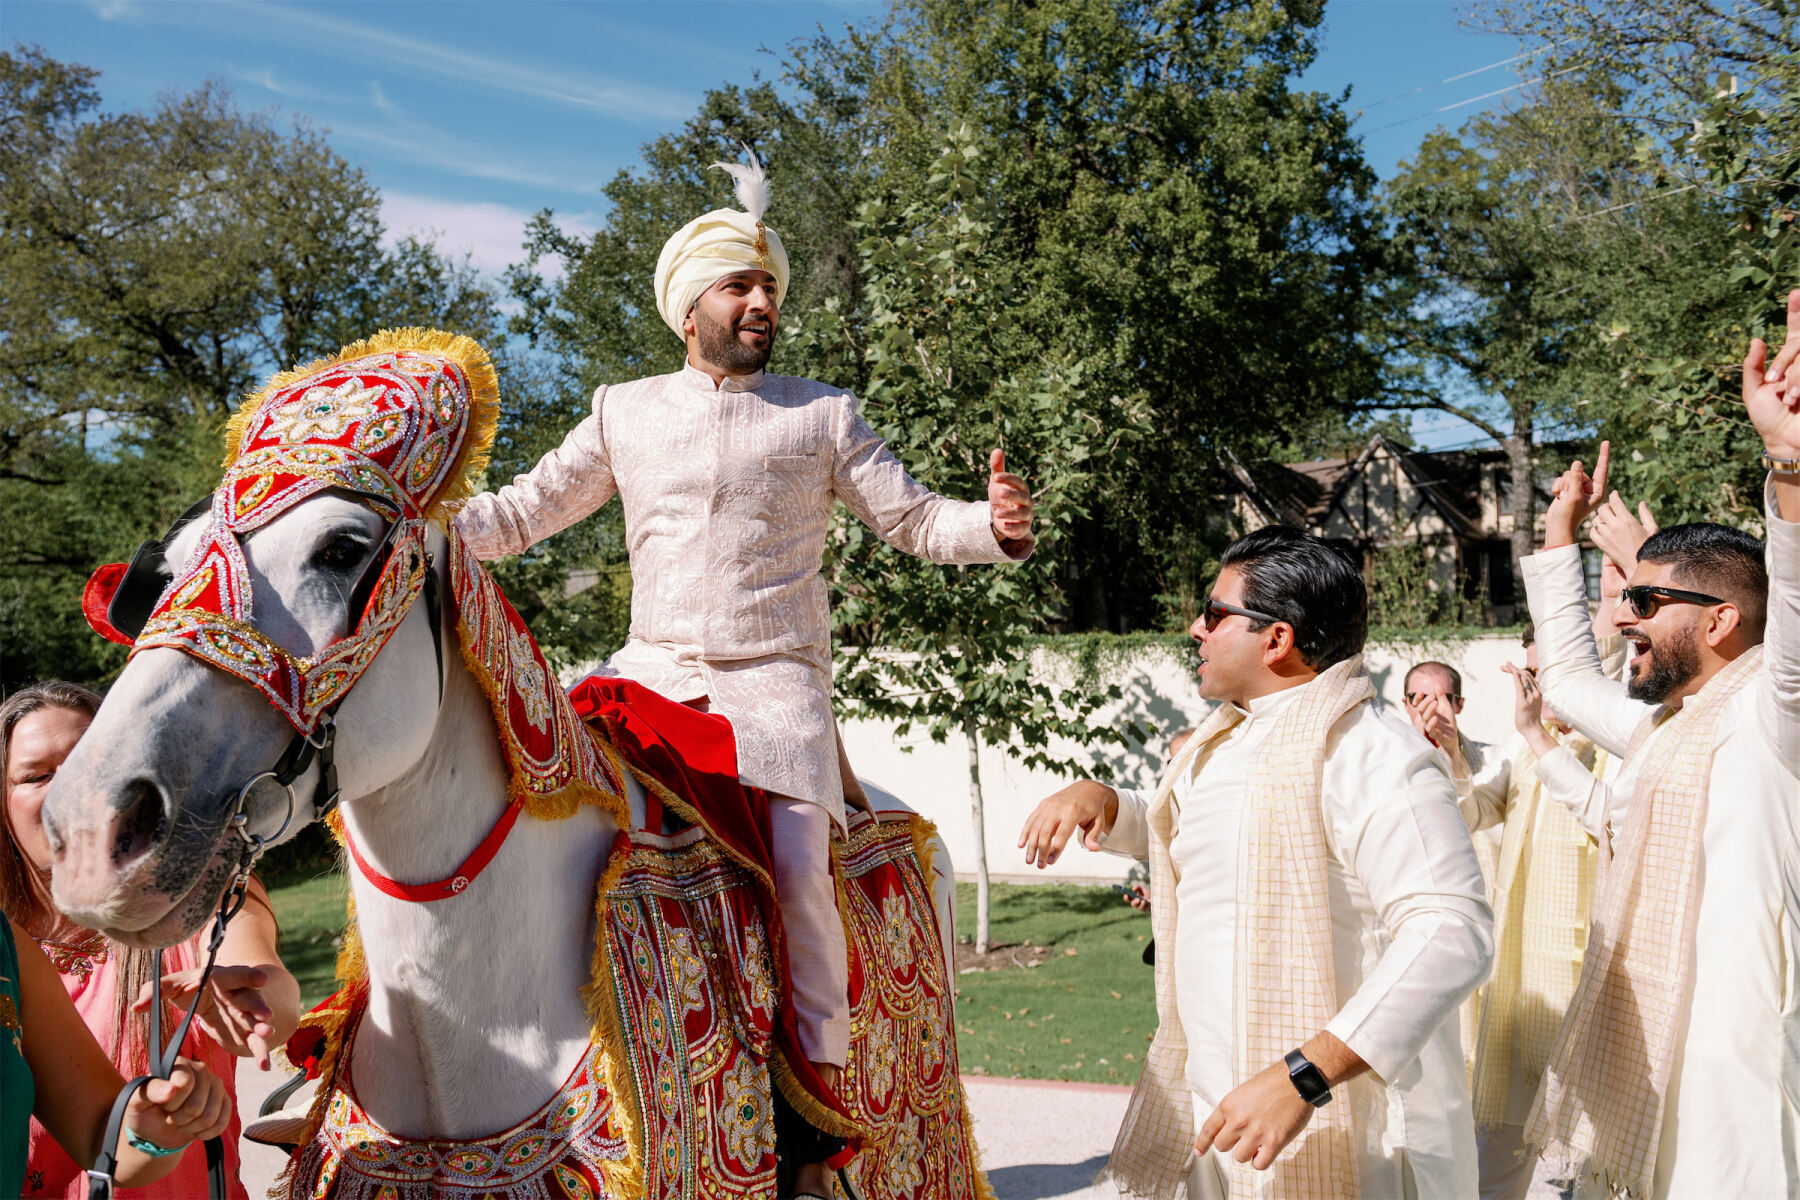 A groom on horseback enjoys his baraat on the way to his Indian fusion wedding ceremony.